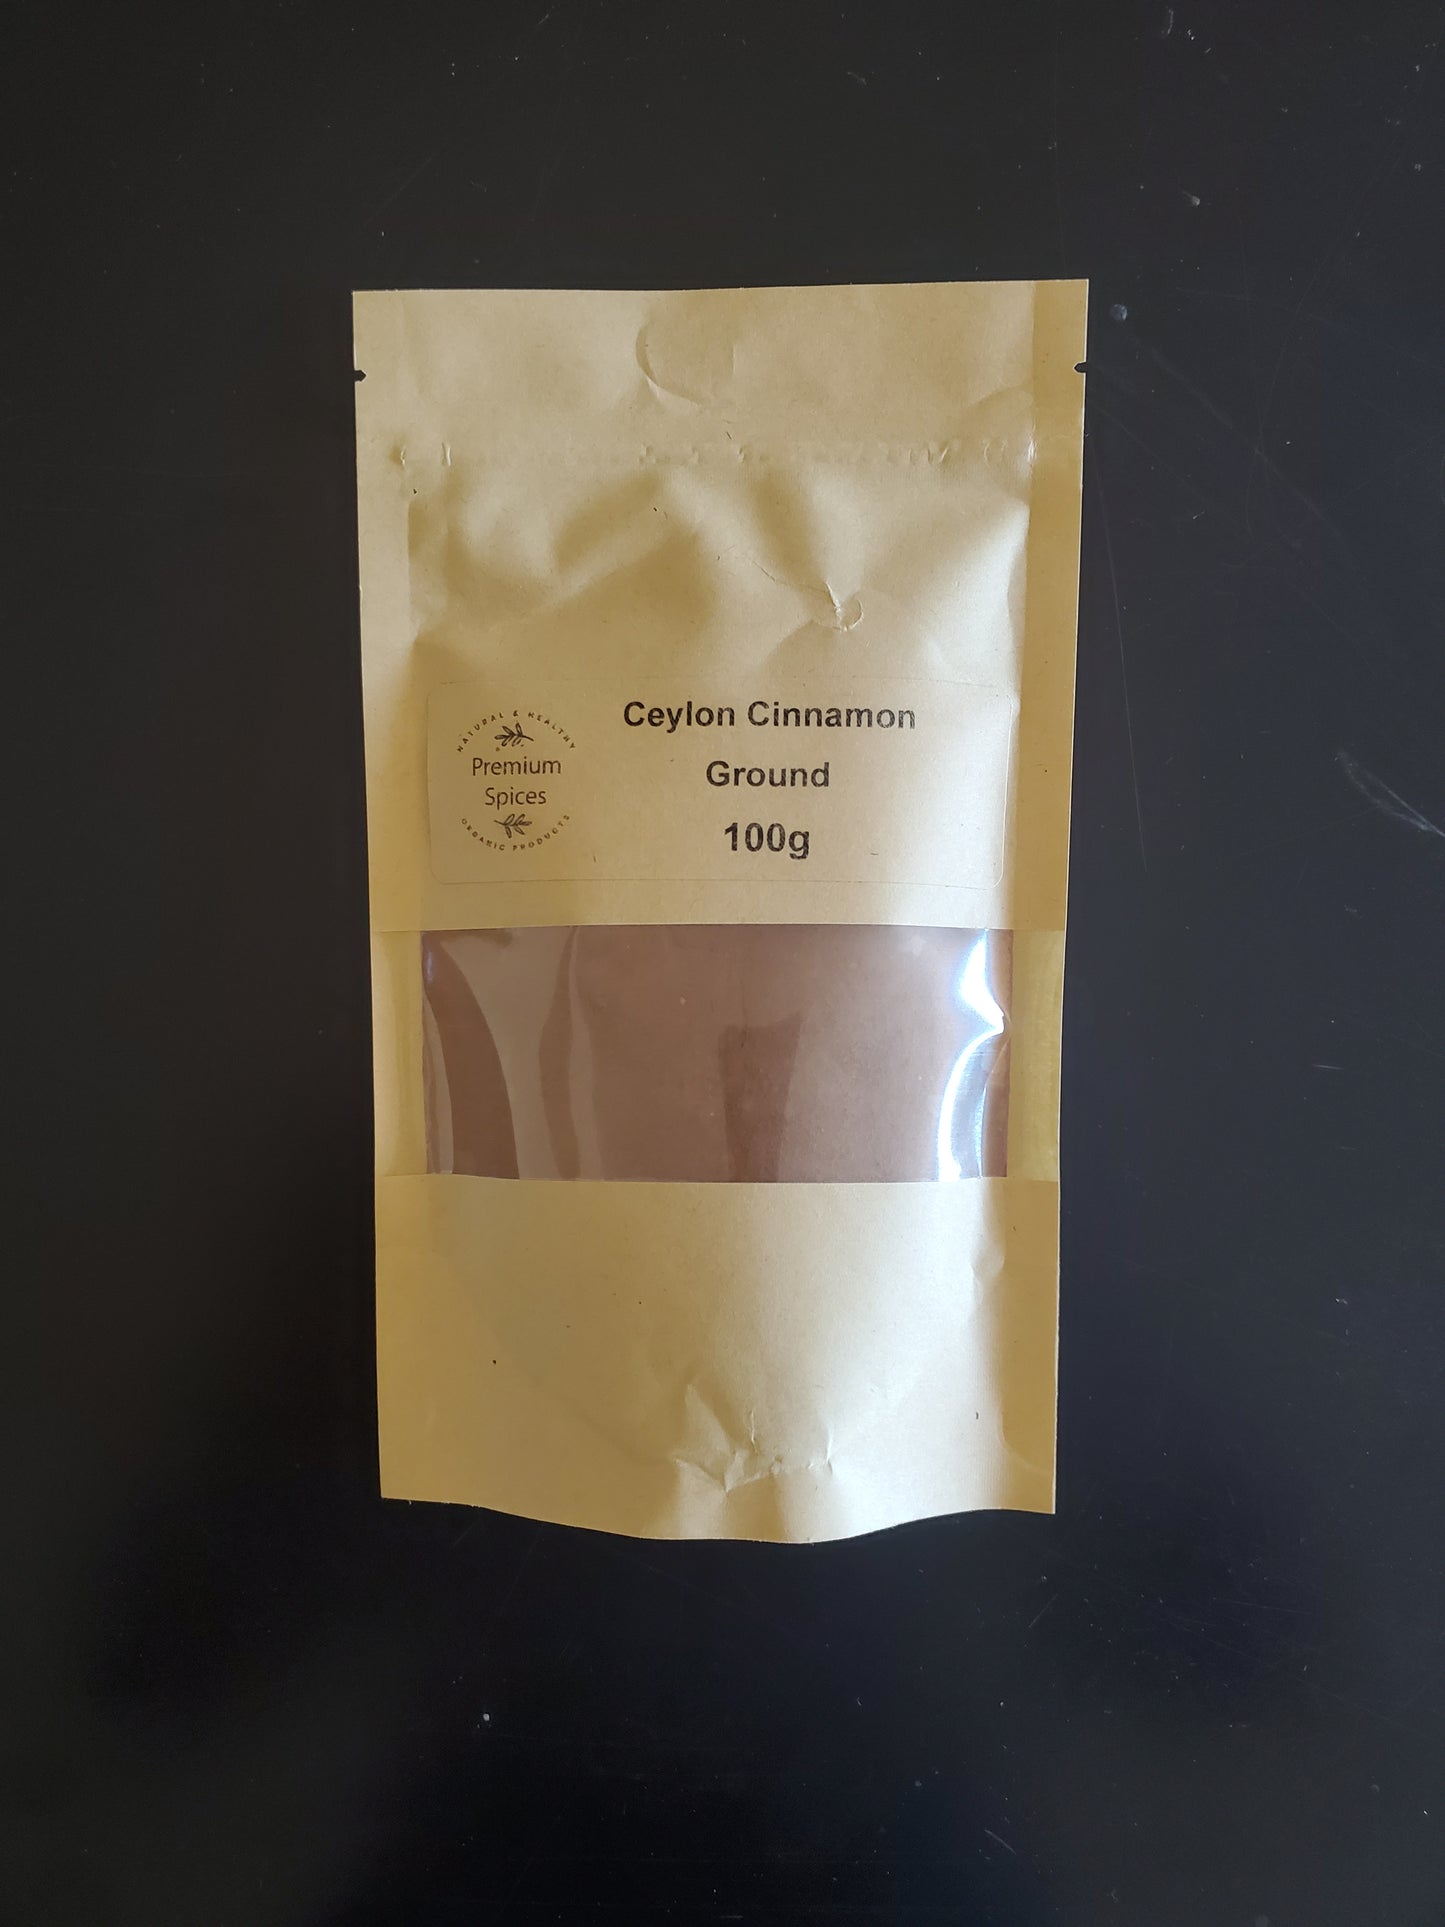 finest Ceylon cinnamon NZ sourced directly from Sri Lanka, showing 100g pack